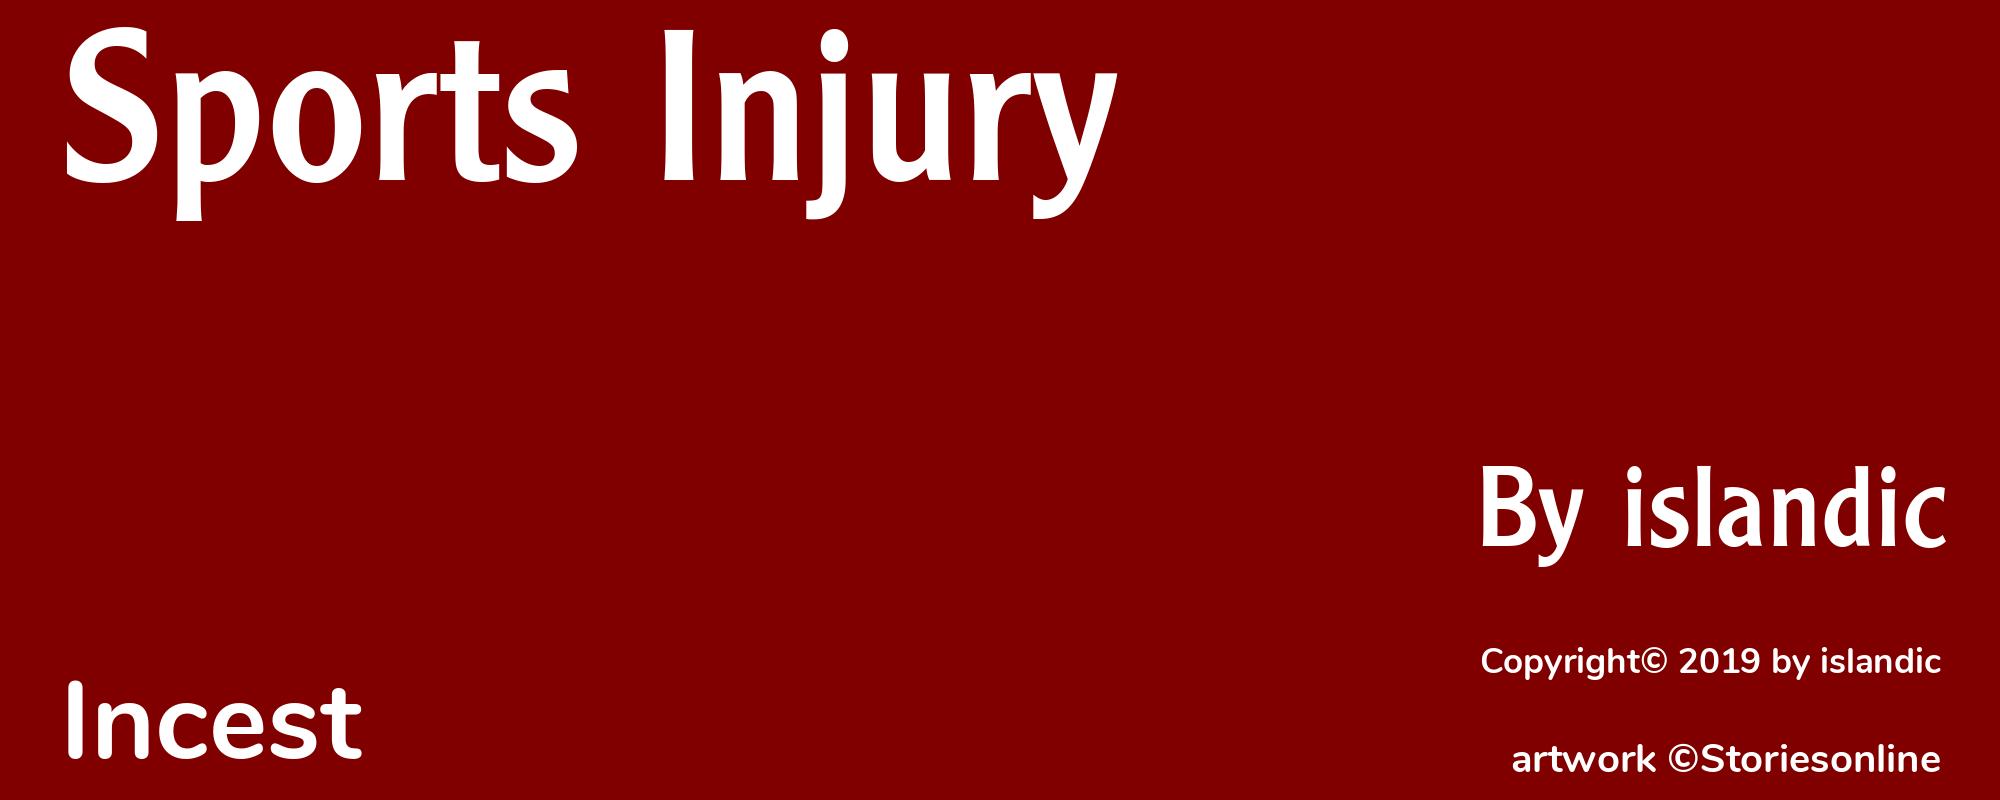 Sports Injury - Cover